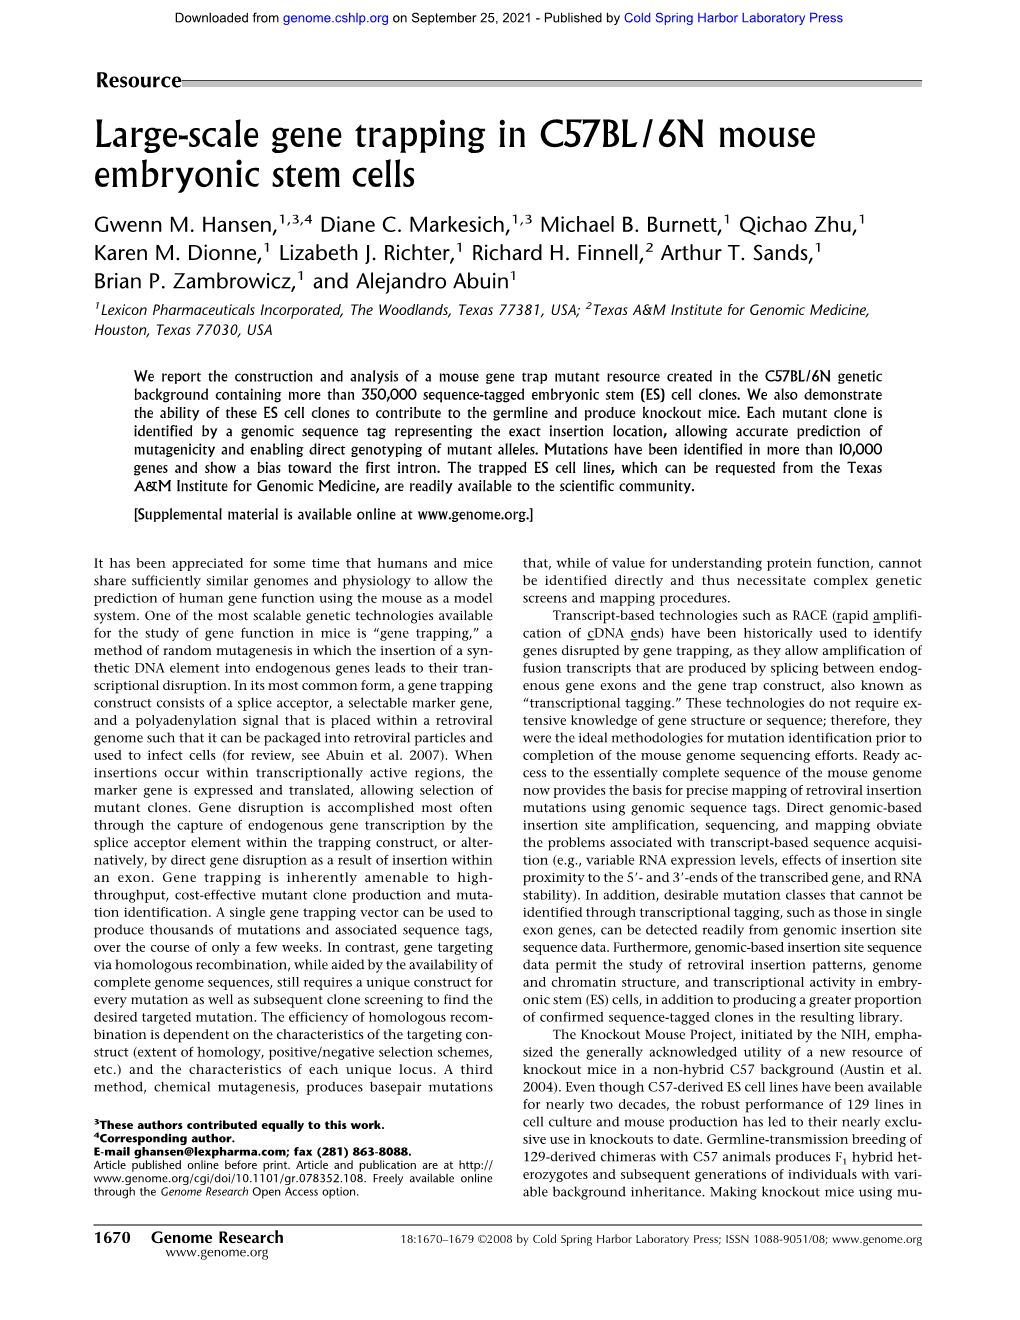 Large-Scale Gene Trapping in C57BL/6N Mouse Embryonic Stem Cells